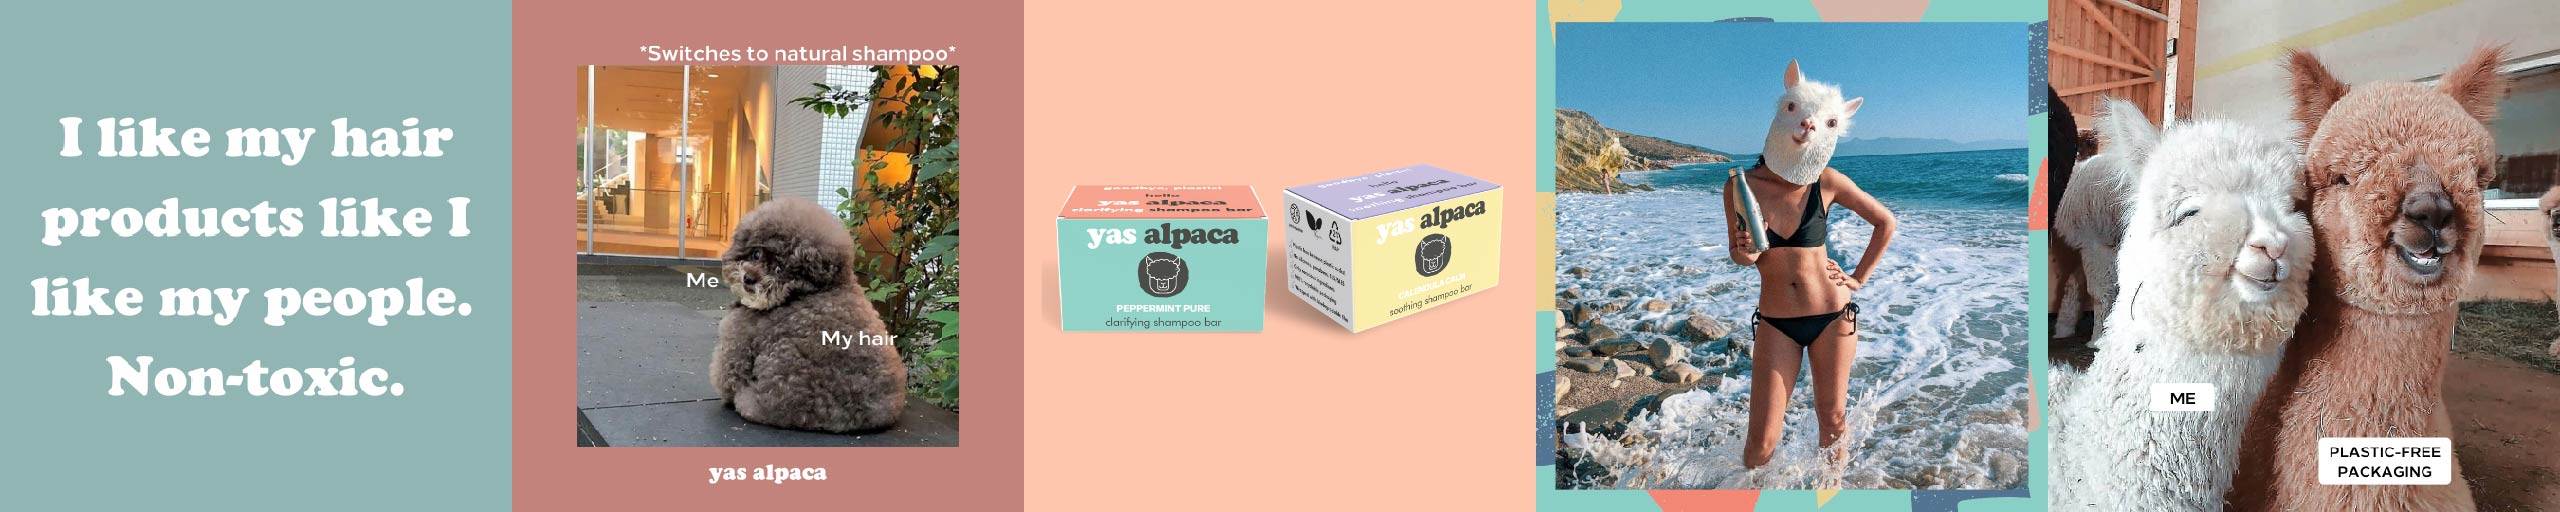 Five images from Yas Alpaca instagram grid